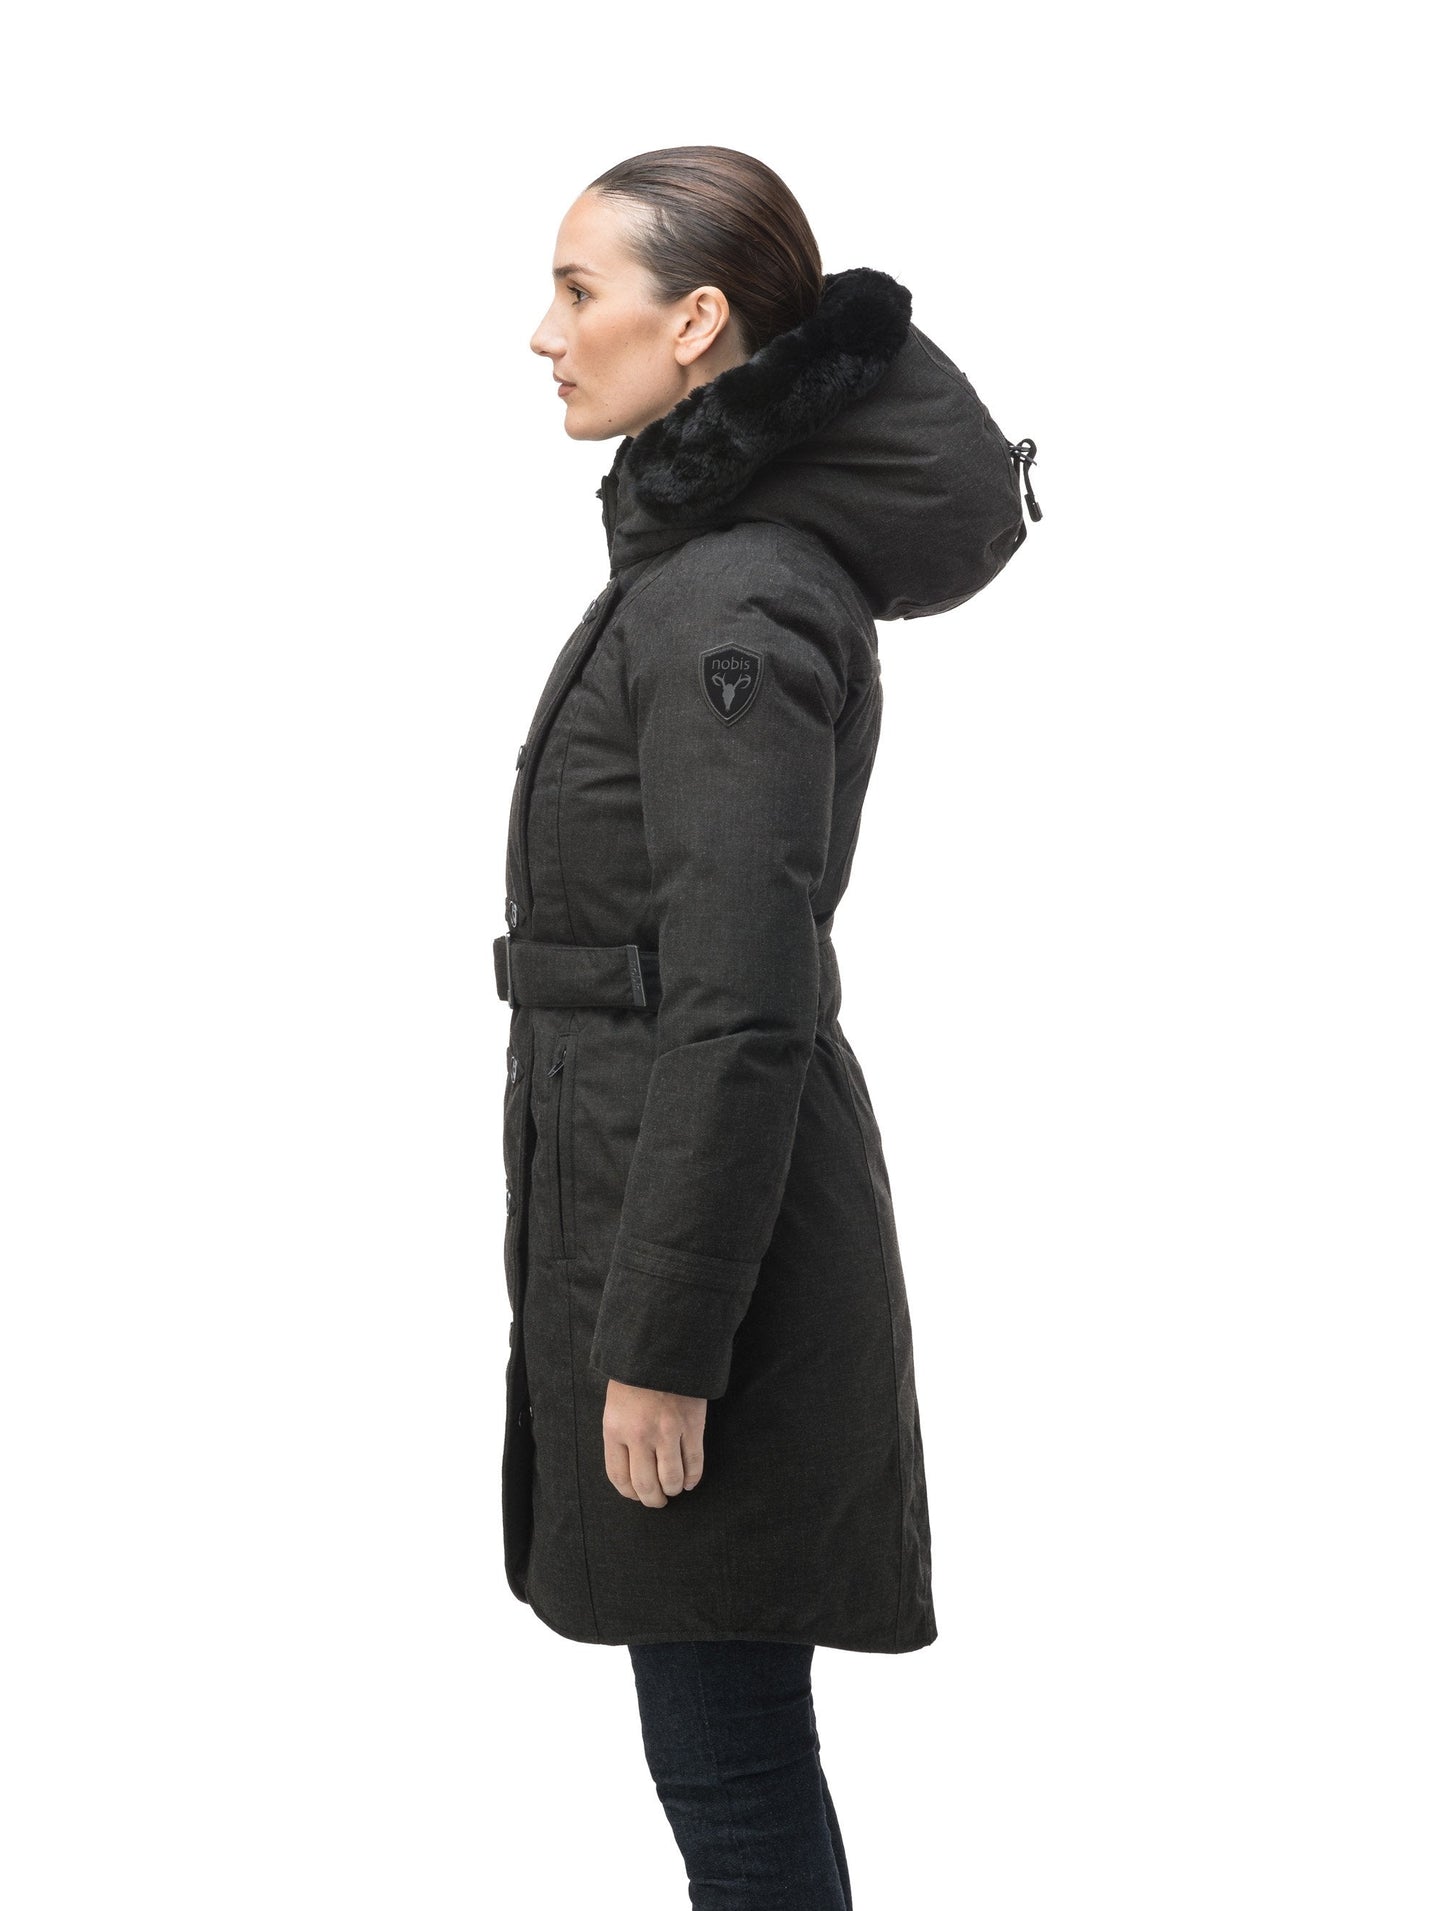 Women's down filled calf length parka with belted waist, and removable Rex Rabbit fur collar in H. Black